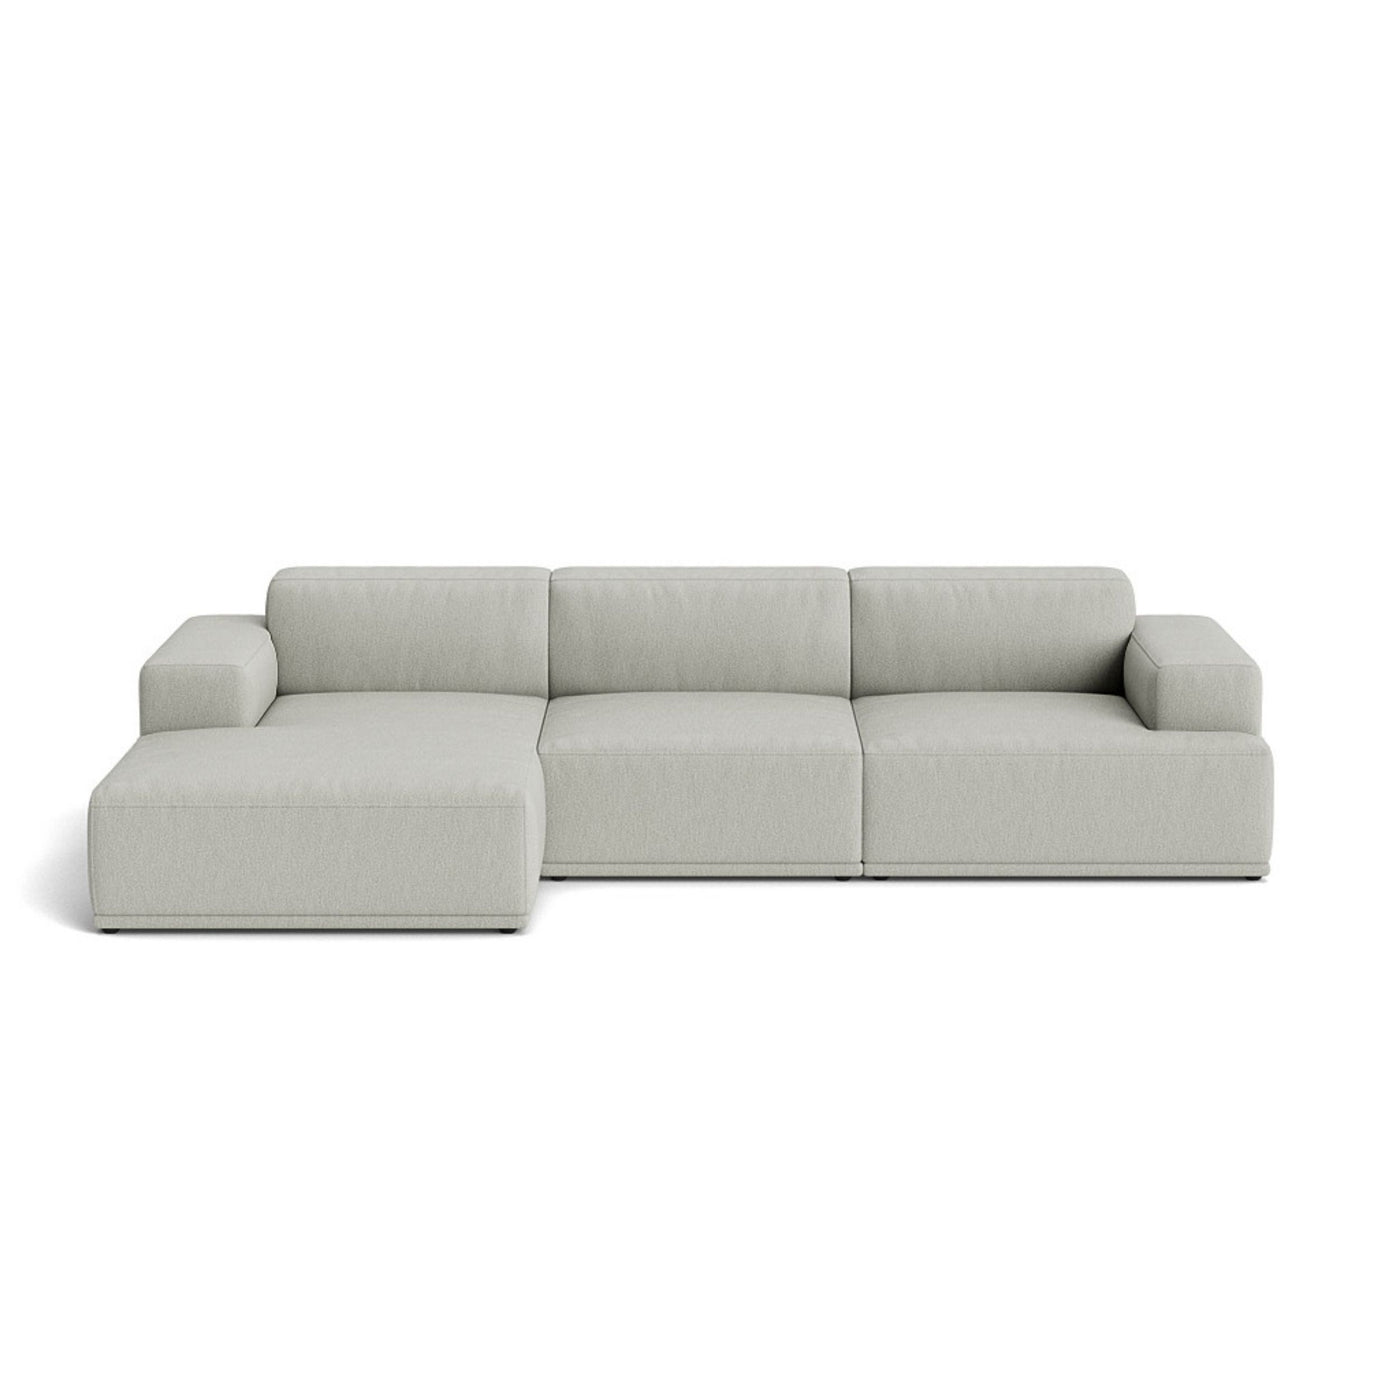 Muuto Connect Soft Modular 3 Seater Sofa, configuration 2. Made-to-order from someday designs. #colour_clay-12